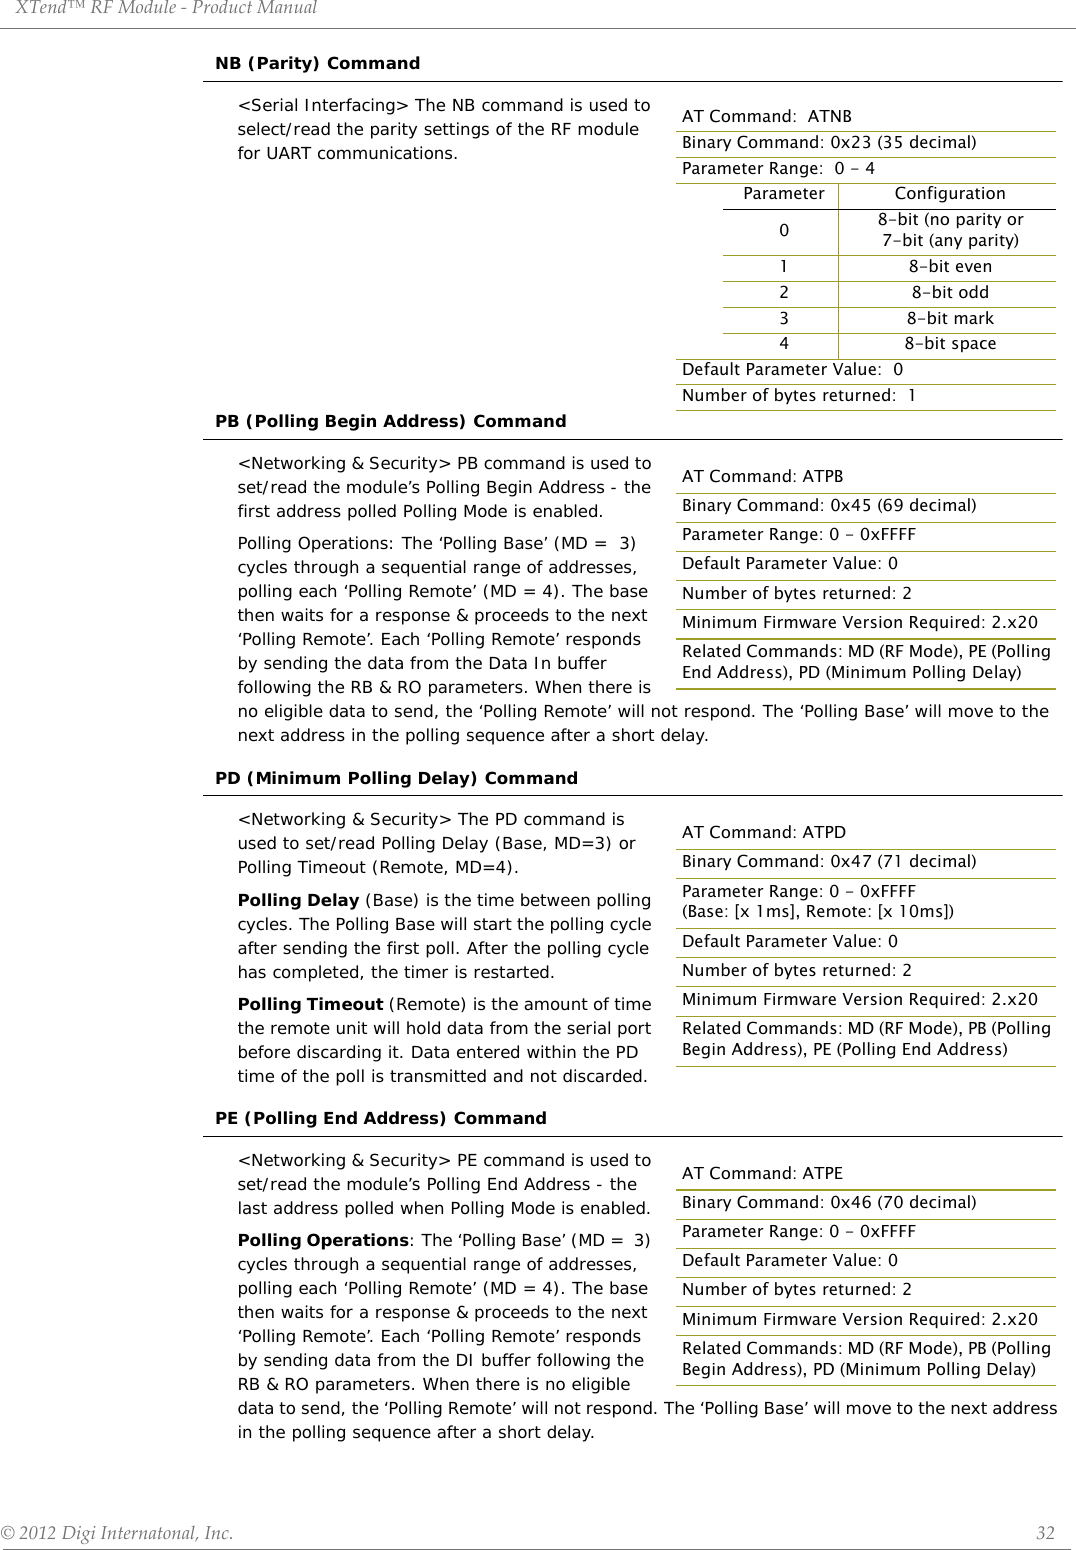 XTend™ RF Module - Product Manual © 2012 Digi Internatonal, Inc.      32NB (Parity) Command&lt;Serial Interfacing&gt; The NB command is used to select/read the parity settings of the RF module for UART communications.PB (Polling Begin Address) Command&lt;Networking &amp; Security&gt; PB command is used to set/read the module’s Polling Begin Address - the first address polled Polling Mode is enabled.Polling Operations: The ‘Polling Base’ (MD =  3) cycles through a sequential range of addresses, polling each ‘Polling Remote’ (MD = 4). The base then waits for a response &amp; proceeds to the next ‘Polling Remote’. Each ‘Polling Remote’ responds by sending the data from the Data In buffer following the RB &amp; RO parameters. When there is no eligible data to send, the ‘Polling Remote’ will not respond. The ‘Polling Base’ will move to the next address in the polling sequence after a short delay.PD (Minimum Polling Delay) Command&lt;Networking &amp; Security&gt; The PD command is used to set/read Polling Delay (Base, MD=3) or Polling Timeout (Remote, MD=4). Polling Delay (Base) is the time between polling cycles. The Polling Base will start the polling cycle after sending the first poll. After the polling cycle has completed, the timer is restarted.Polling Timeout (Remote) is the amount of time the remote unit will hold data from the serial port before discarding it. Data entered within the PD time of the poll is transmitted and not discarded.PE (Polling End Address) Command&lt;Networking &amp; Security&gt; PE command is used to set/read the module’s Polling End Address - the last address polled when Polling Mode is enabled.Polling Operations: The ‘Polling Base’ (MD =  3) cycles through a sequential range of addresses, polling each ‘Polling Remote’ (MD = 4). The base then waits for a response &amp; proceeds to the next ‘Polling Remote’. Each ‘Polling Remote’ responds by sending data from the DI buffer following the RB &amp; RO parameters. When there is no eligible data to send, the ‘Polling Remote’ will not respond. The ‘Polling Base’ will move to the next address in the polling sequence after a short delay.AT Command:  ATNBBinary Command: 0x23 (35 decimal)Parameter Range:  0 - 4Parameter Configuration08-bit (no parity or7-bit (any parity)18-bit even28-bit odd38-bit mark48-bit spaceDefault Parameter Value:  0Number of bytes returned:  1AT Command: ATPBBinary Command: 0x45 (69 decimal)Parameter Range: 0 - 0xFFFFDefault Parameter Value: 0Number of bytes returned: 2Minimum Firmware Version Required: 2.x20Related Commands: MD (RF Mode), PE (Polling End Address), PD (Minimum Polling Delay)AT Command: ATPDBinary Command: 0x47 (71 decimal)Parameter Range: 0 - 0xFFFF (Base: [x 1ms], Remote: [x 10ms])Default Parameter Value: 0Number of bytes returned: 2Minimum Firmware Version Required: 2.x20Related Commands: MD (RF Mode), PB (Polling Begin Address), PE (Polling End Address)AT Command: ATPEBinary Command: 0x46 (70 decimal)Parameter Range: 0 - 0xFFFFDefault Parameter Value: 0Number of bytes returned: 2Minimum Firmware Version Required: 2.x20Related Commands: MD (RF Mode), PB (Polling Begin Address), PD (Minimum Polling Delay)